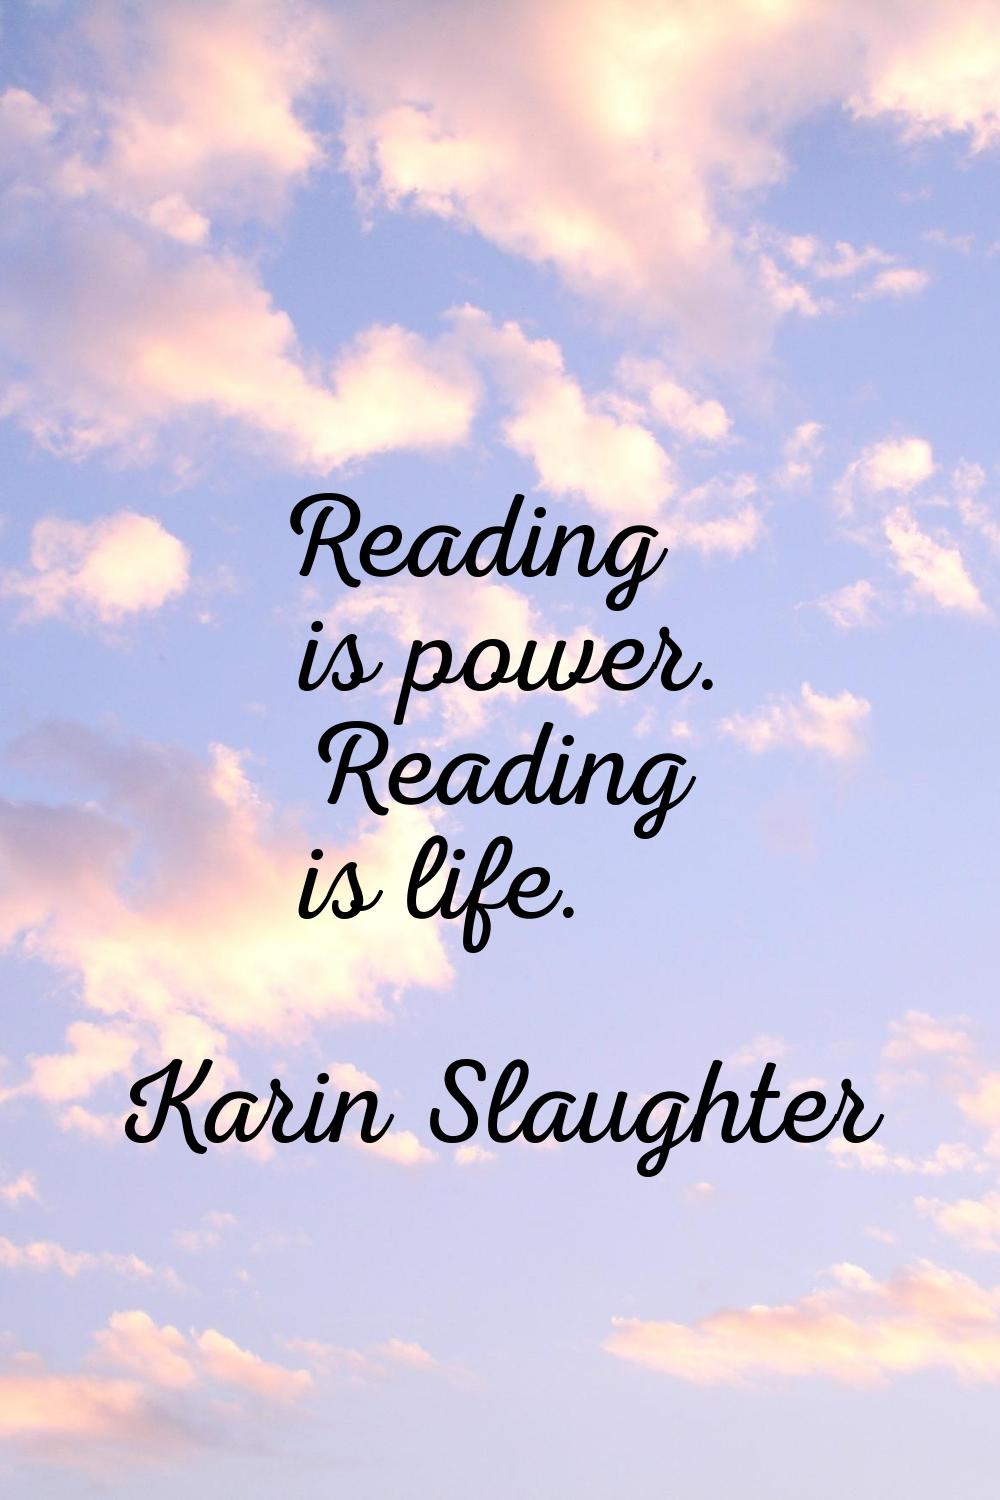 Reading is power. Reading is life.